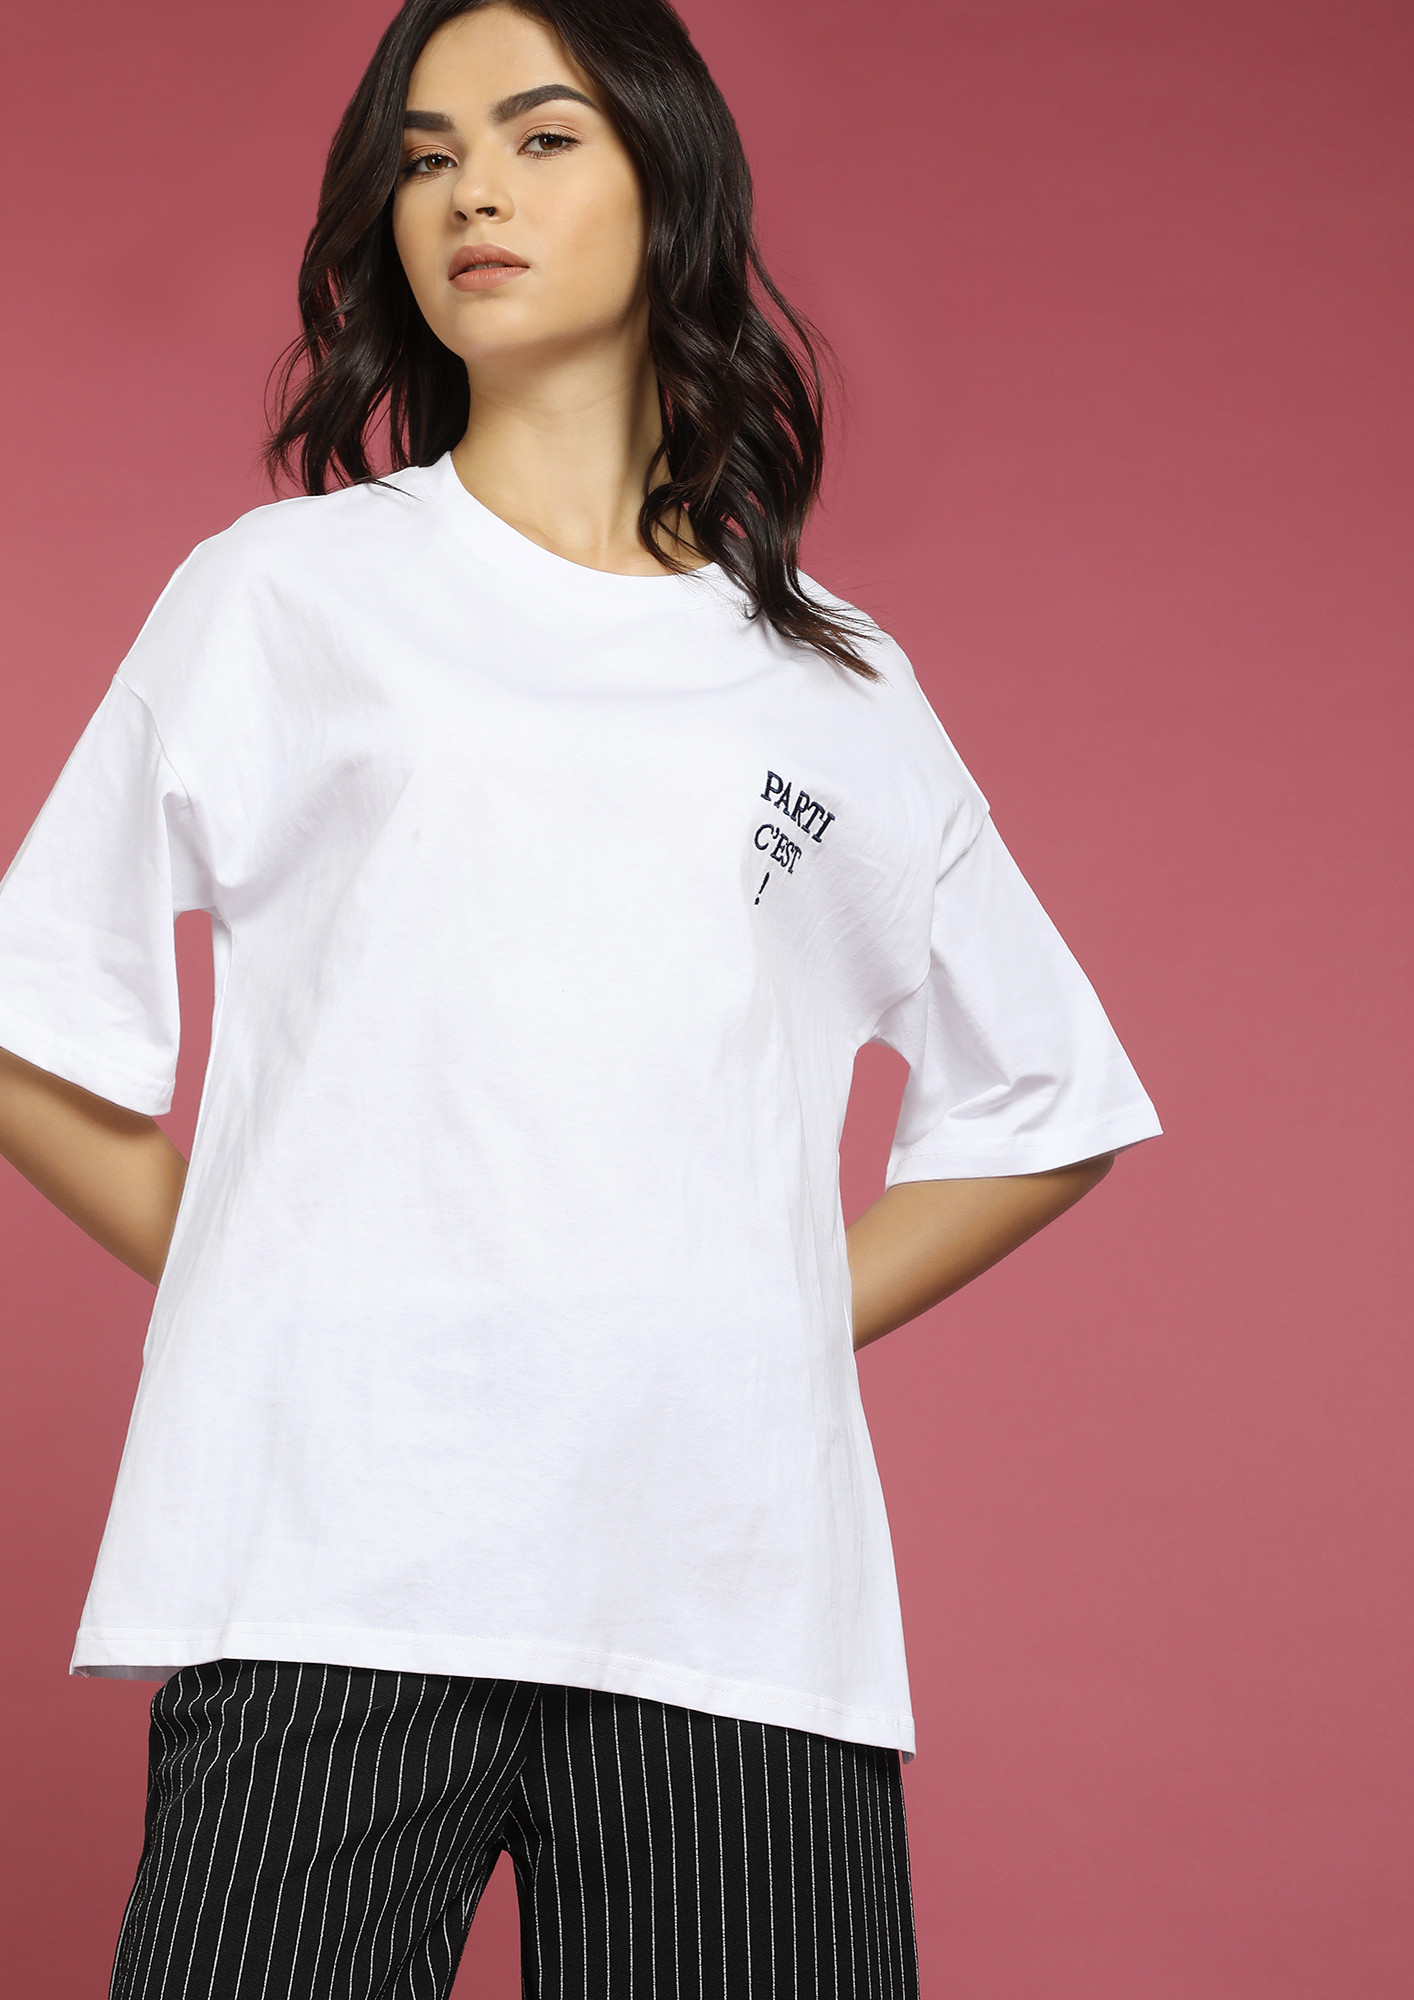 SUCH A COOL GIRL WHITE T-SHIRT